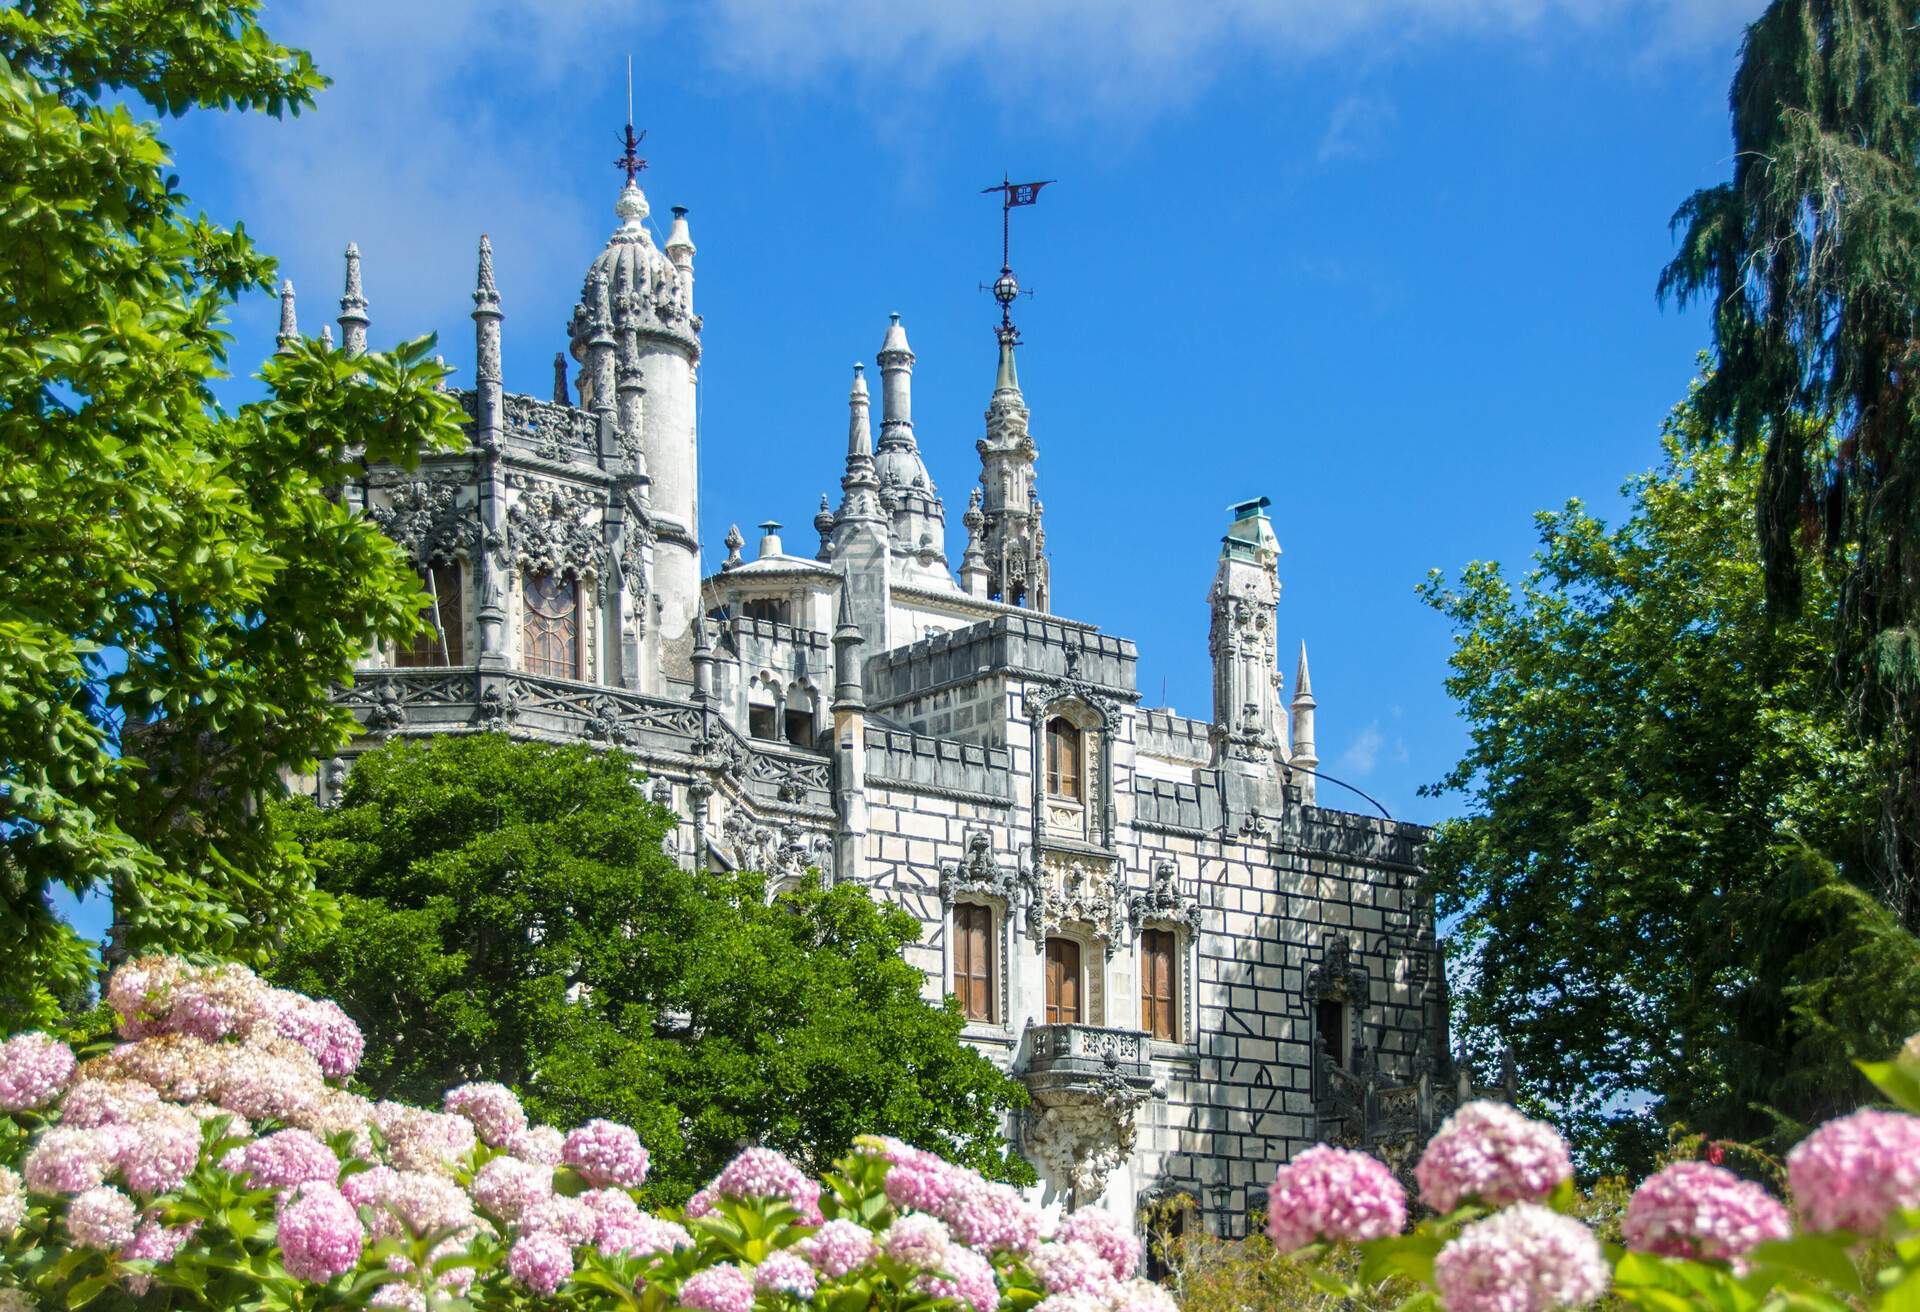 The palace of Quinta da Regaleira on a beatiful summers day surrounded by trees and pink hydrangea